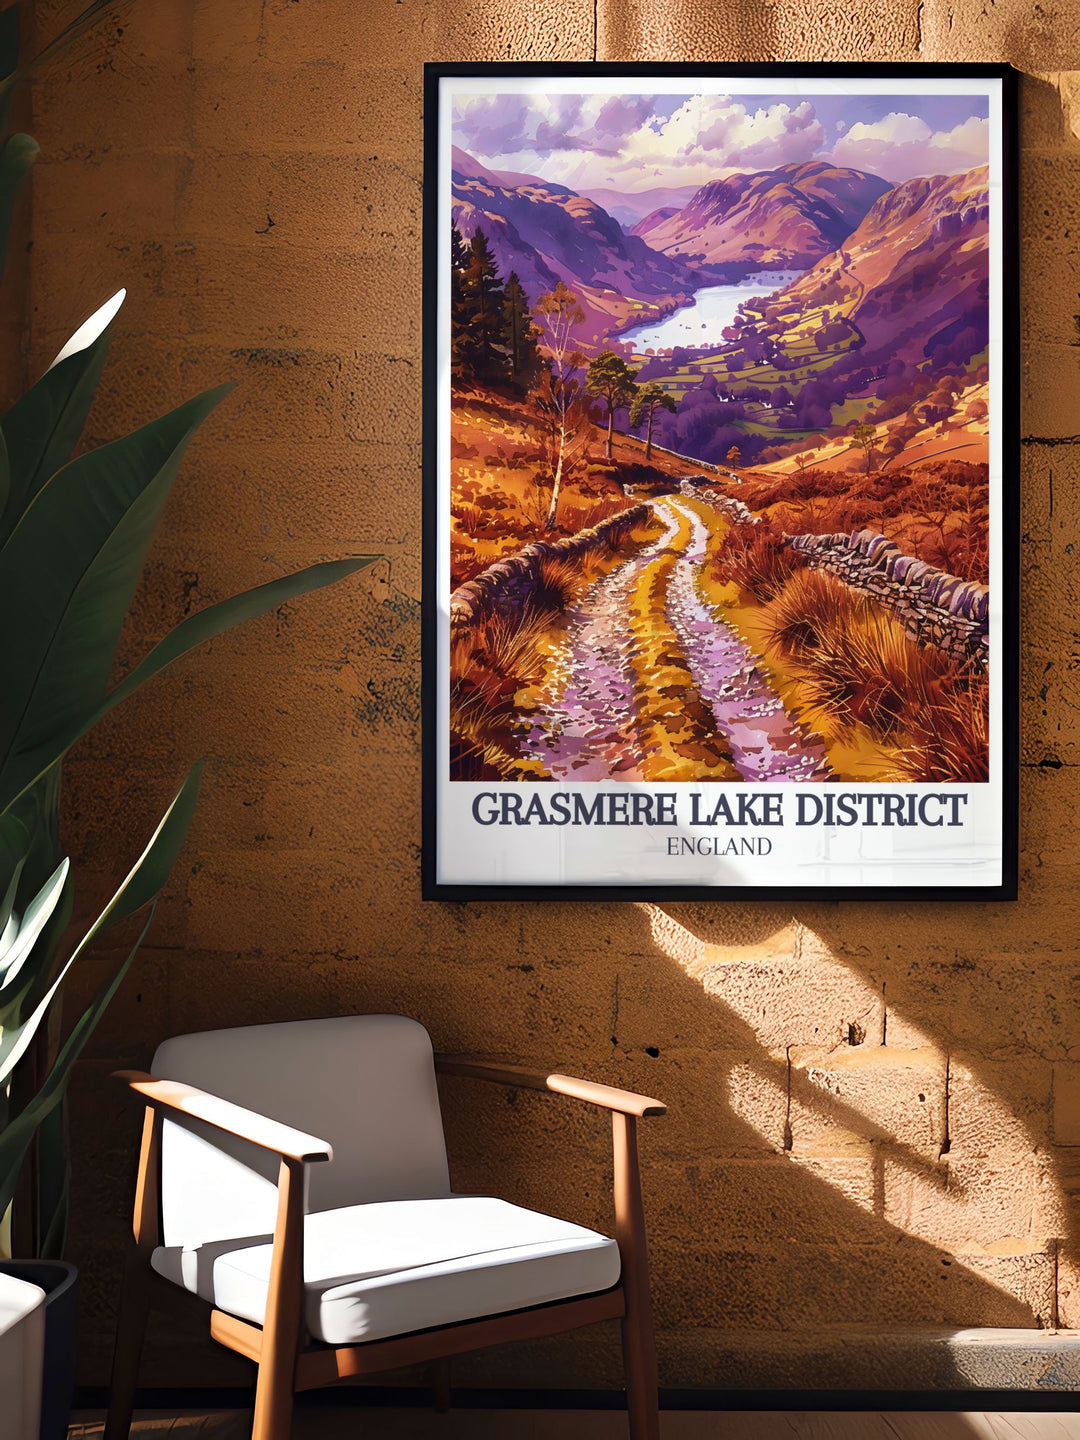 Highlighting the serene Grasmere Lake and the historic Coffin Route, this travel poster captures the unique beauty and historical significance of the Lake District, England, making it an excellent addition for those who appreciate natural and cultural heritage.